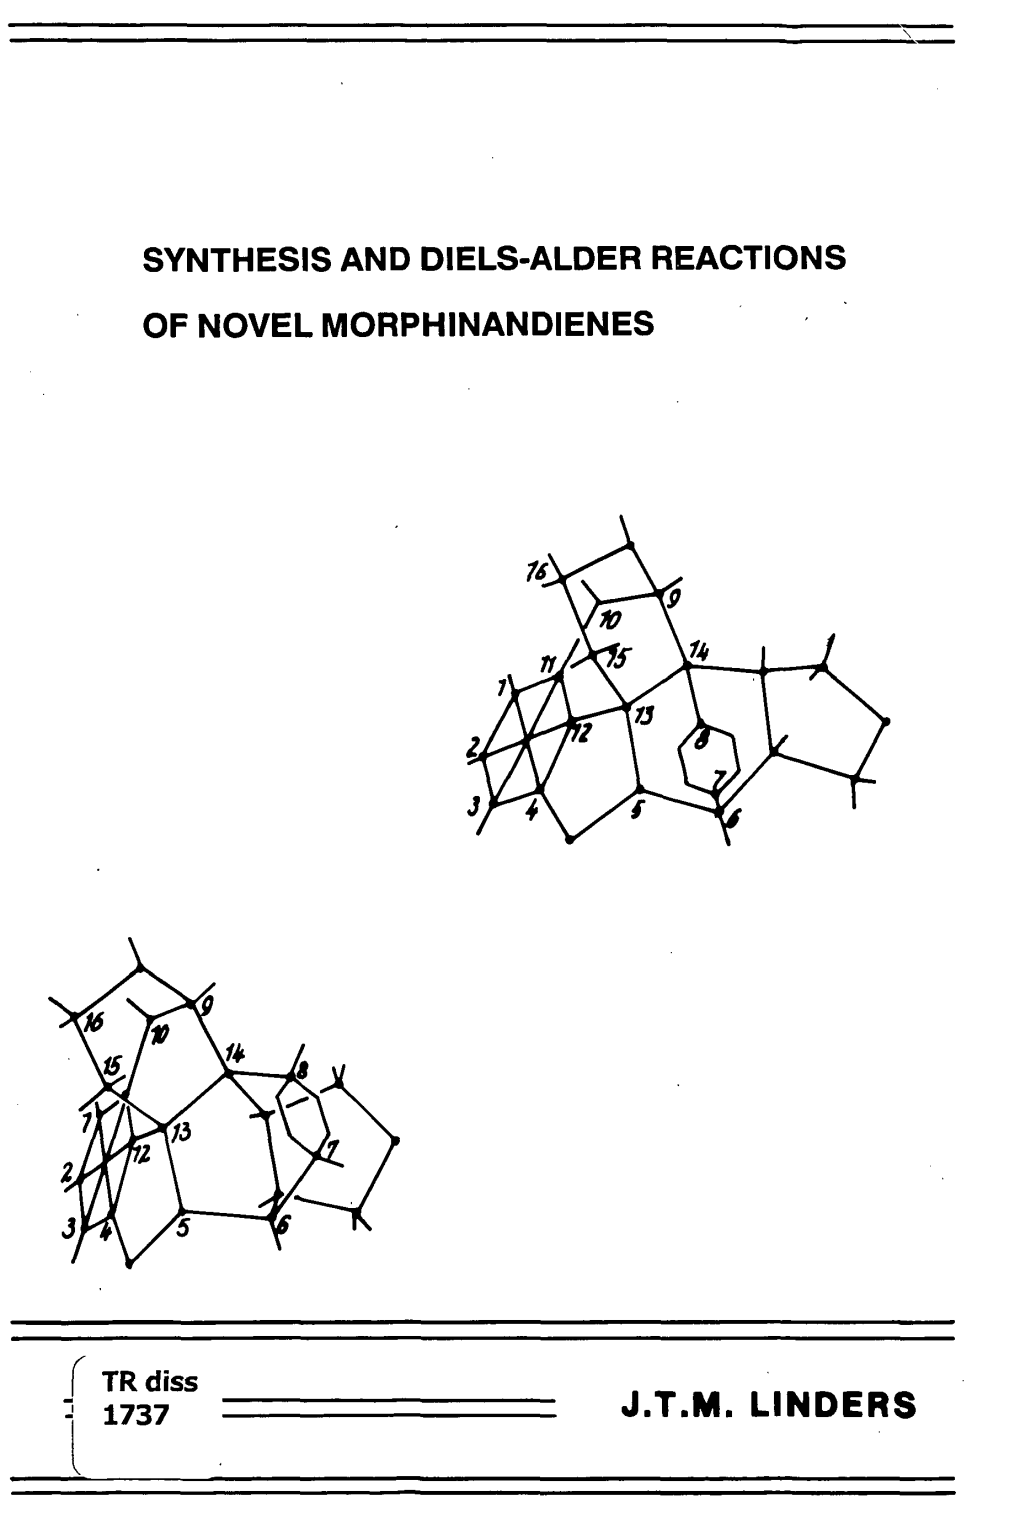 Synthesis and Diels-Alder Reactions of Novel Morphinandienes